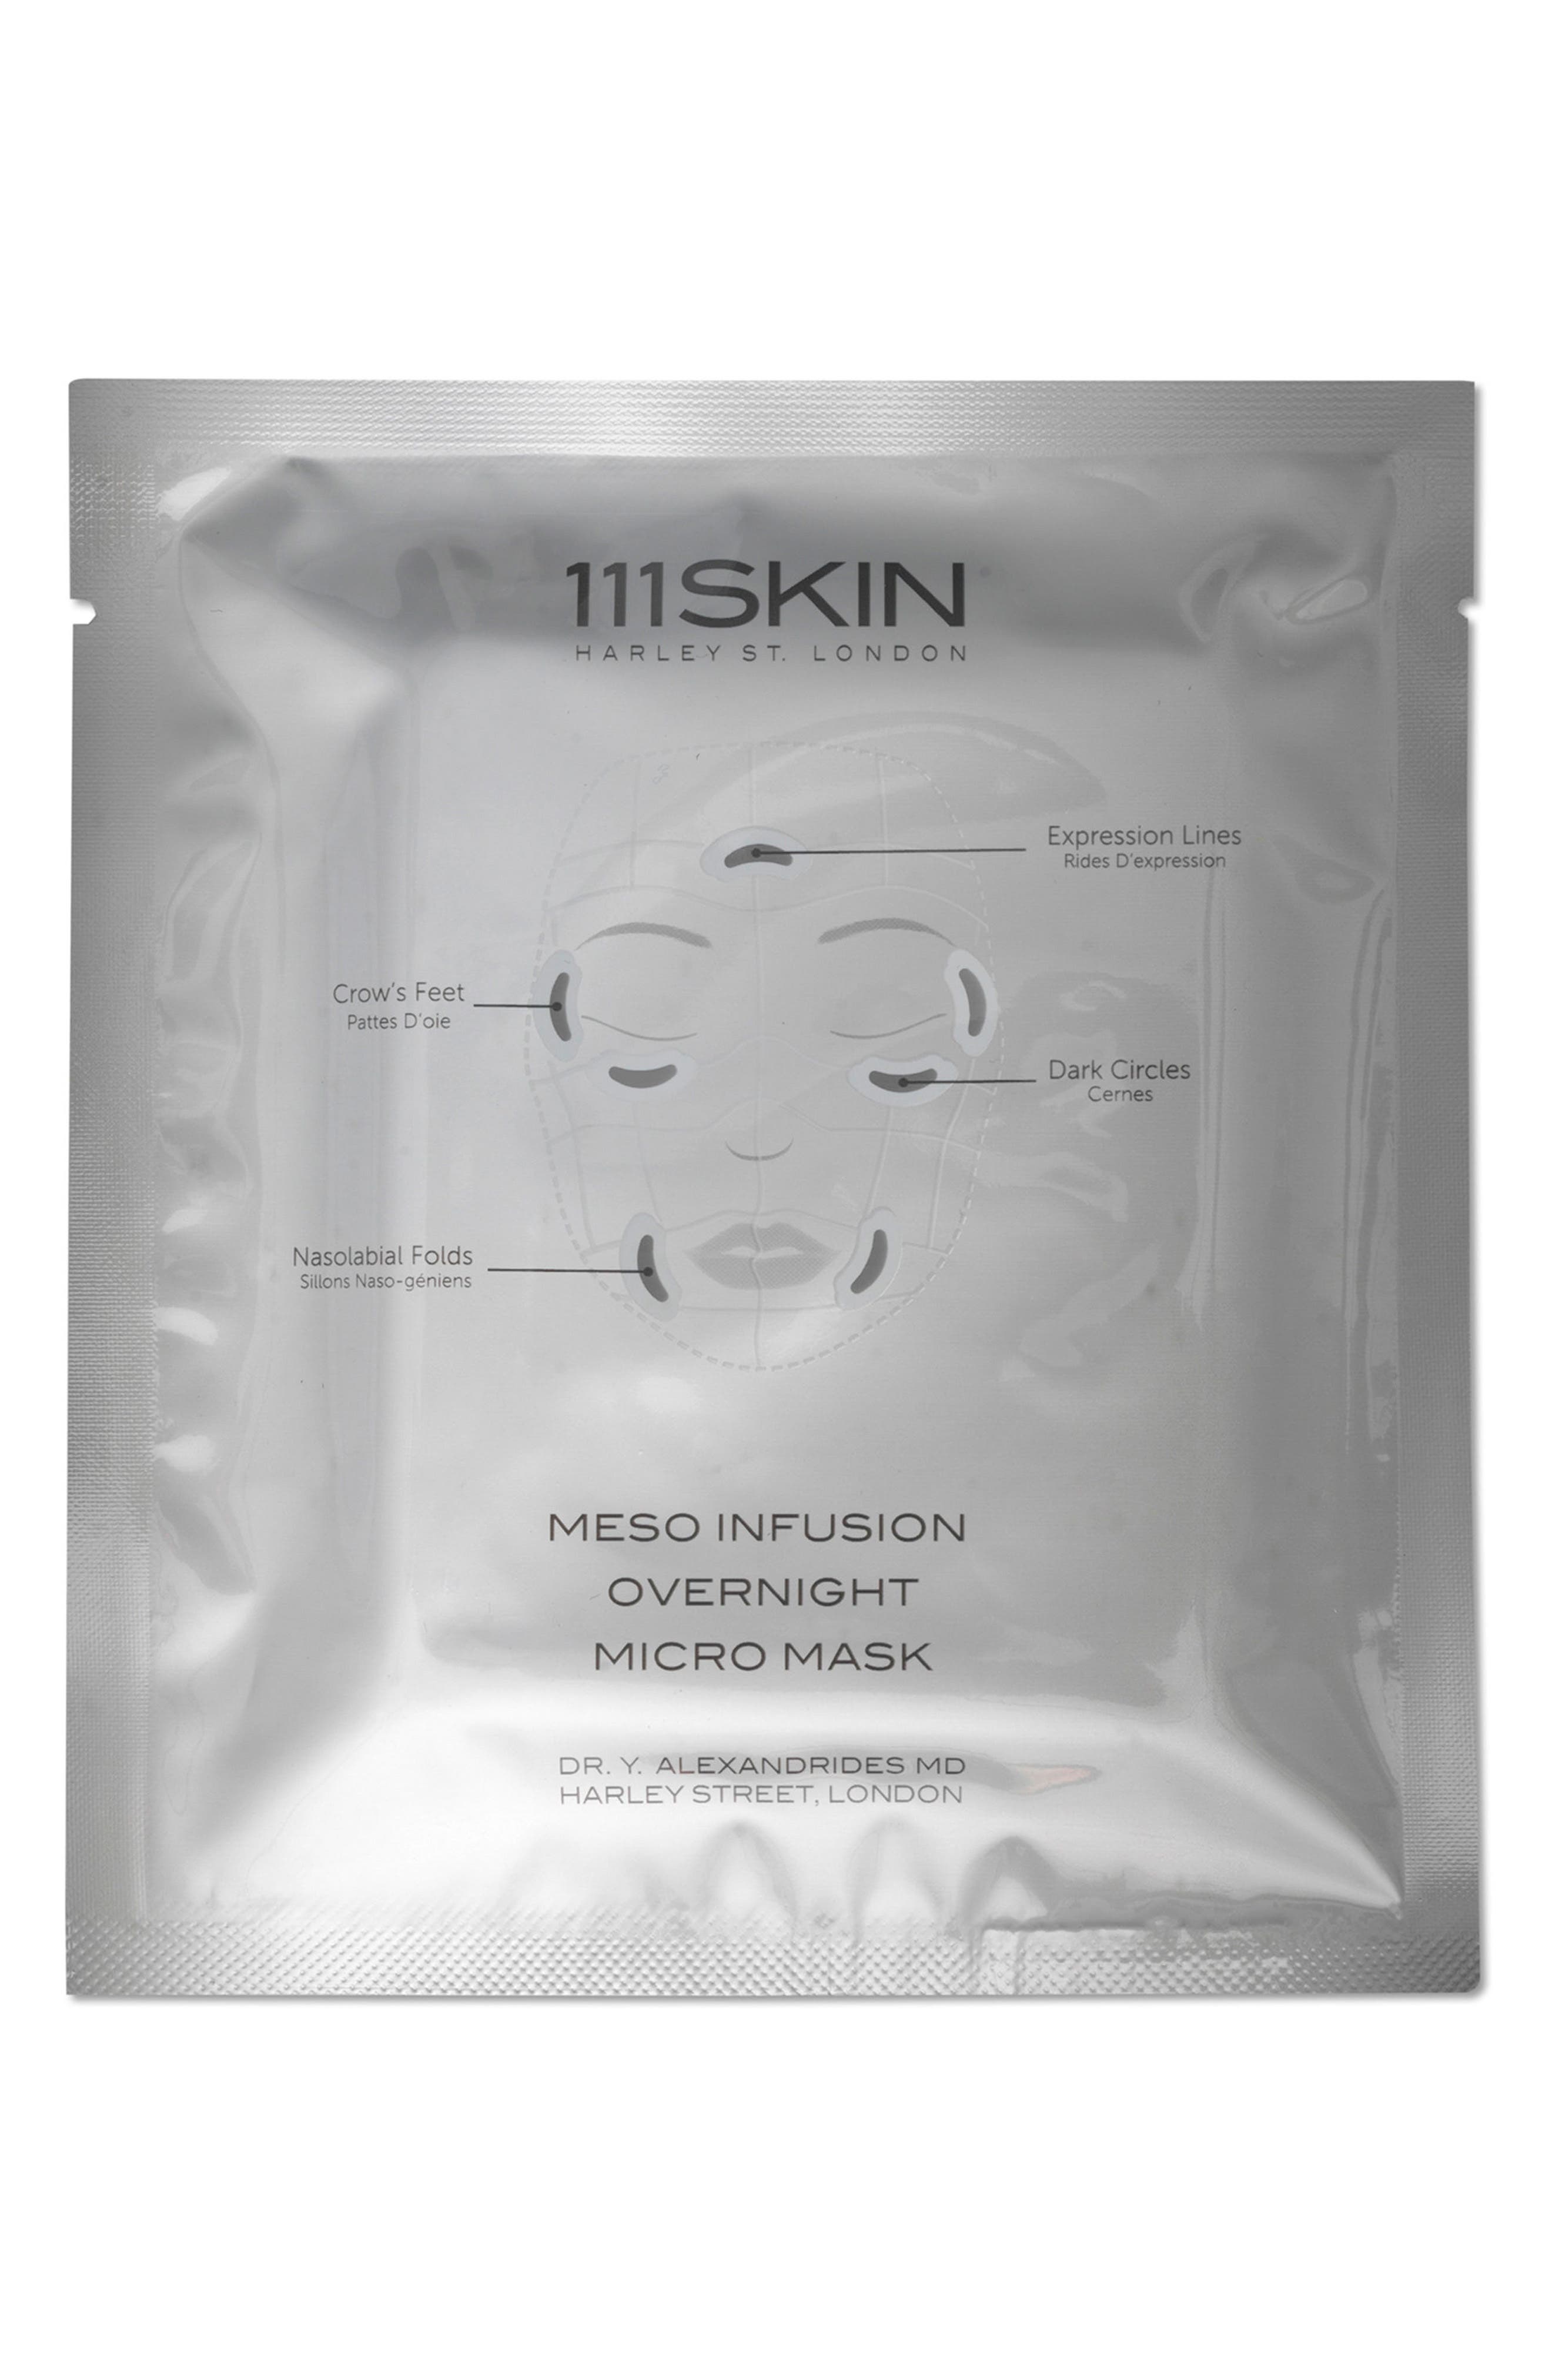 111SKIN Meso Infusion Hyaluronic Acid & Vitamin C Overnight Micro Mask at Nordstrom